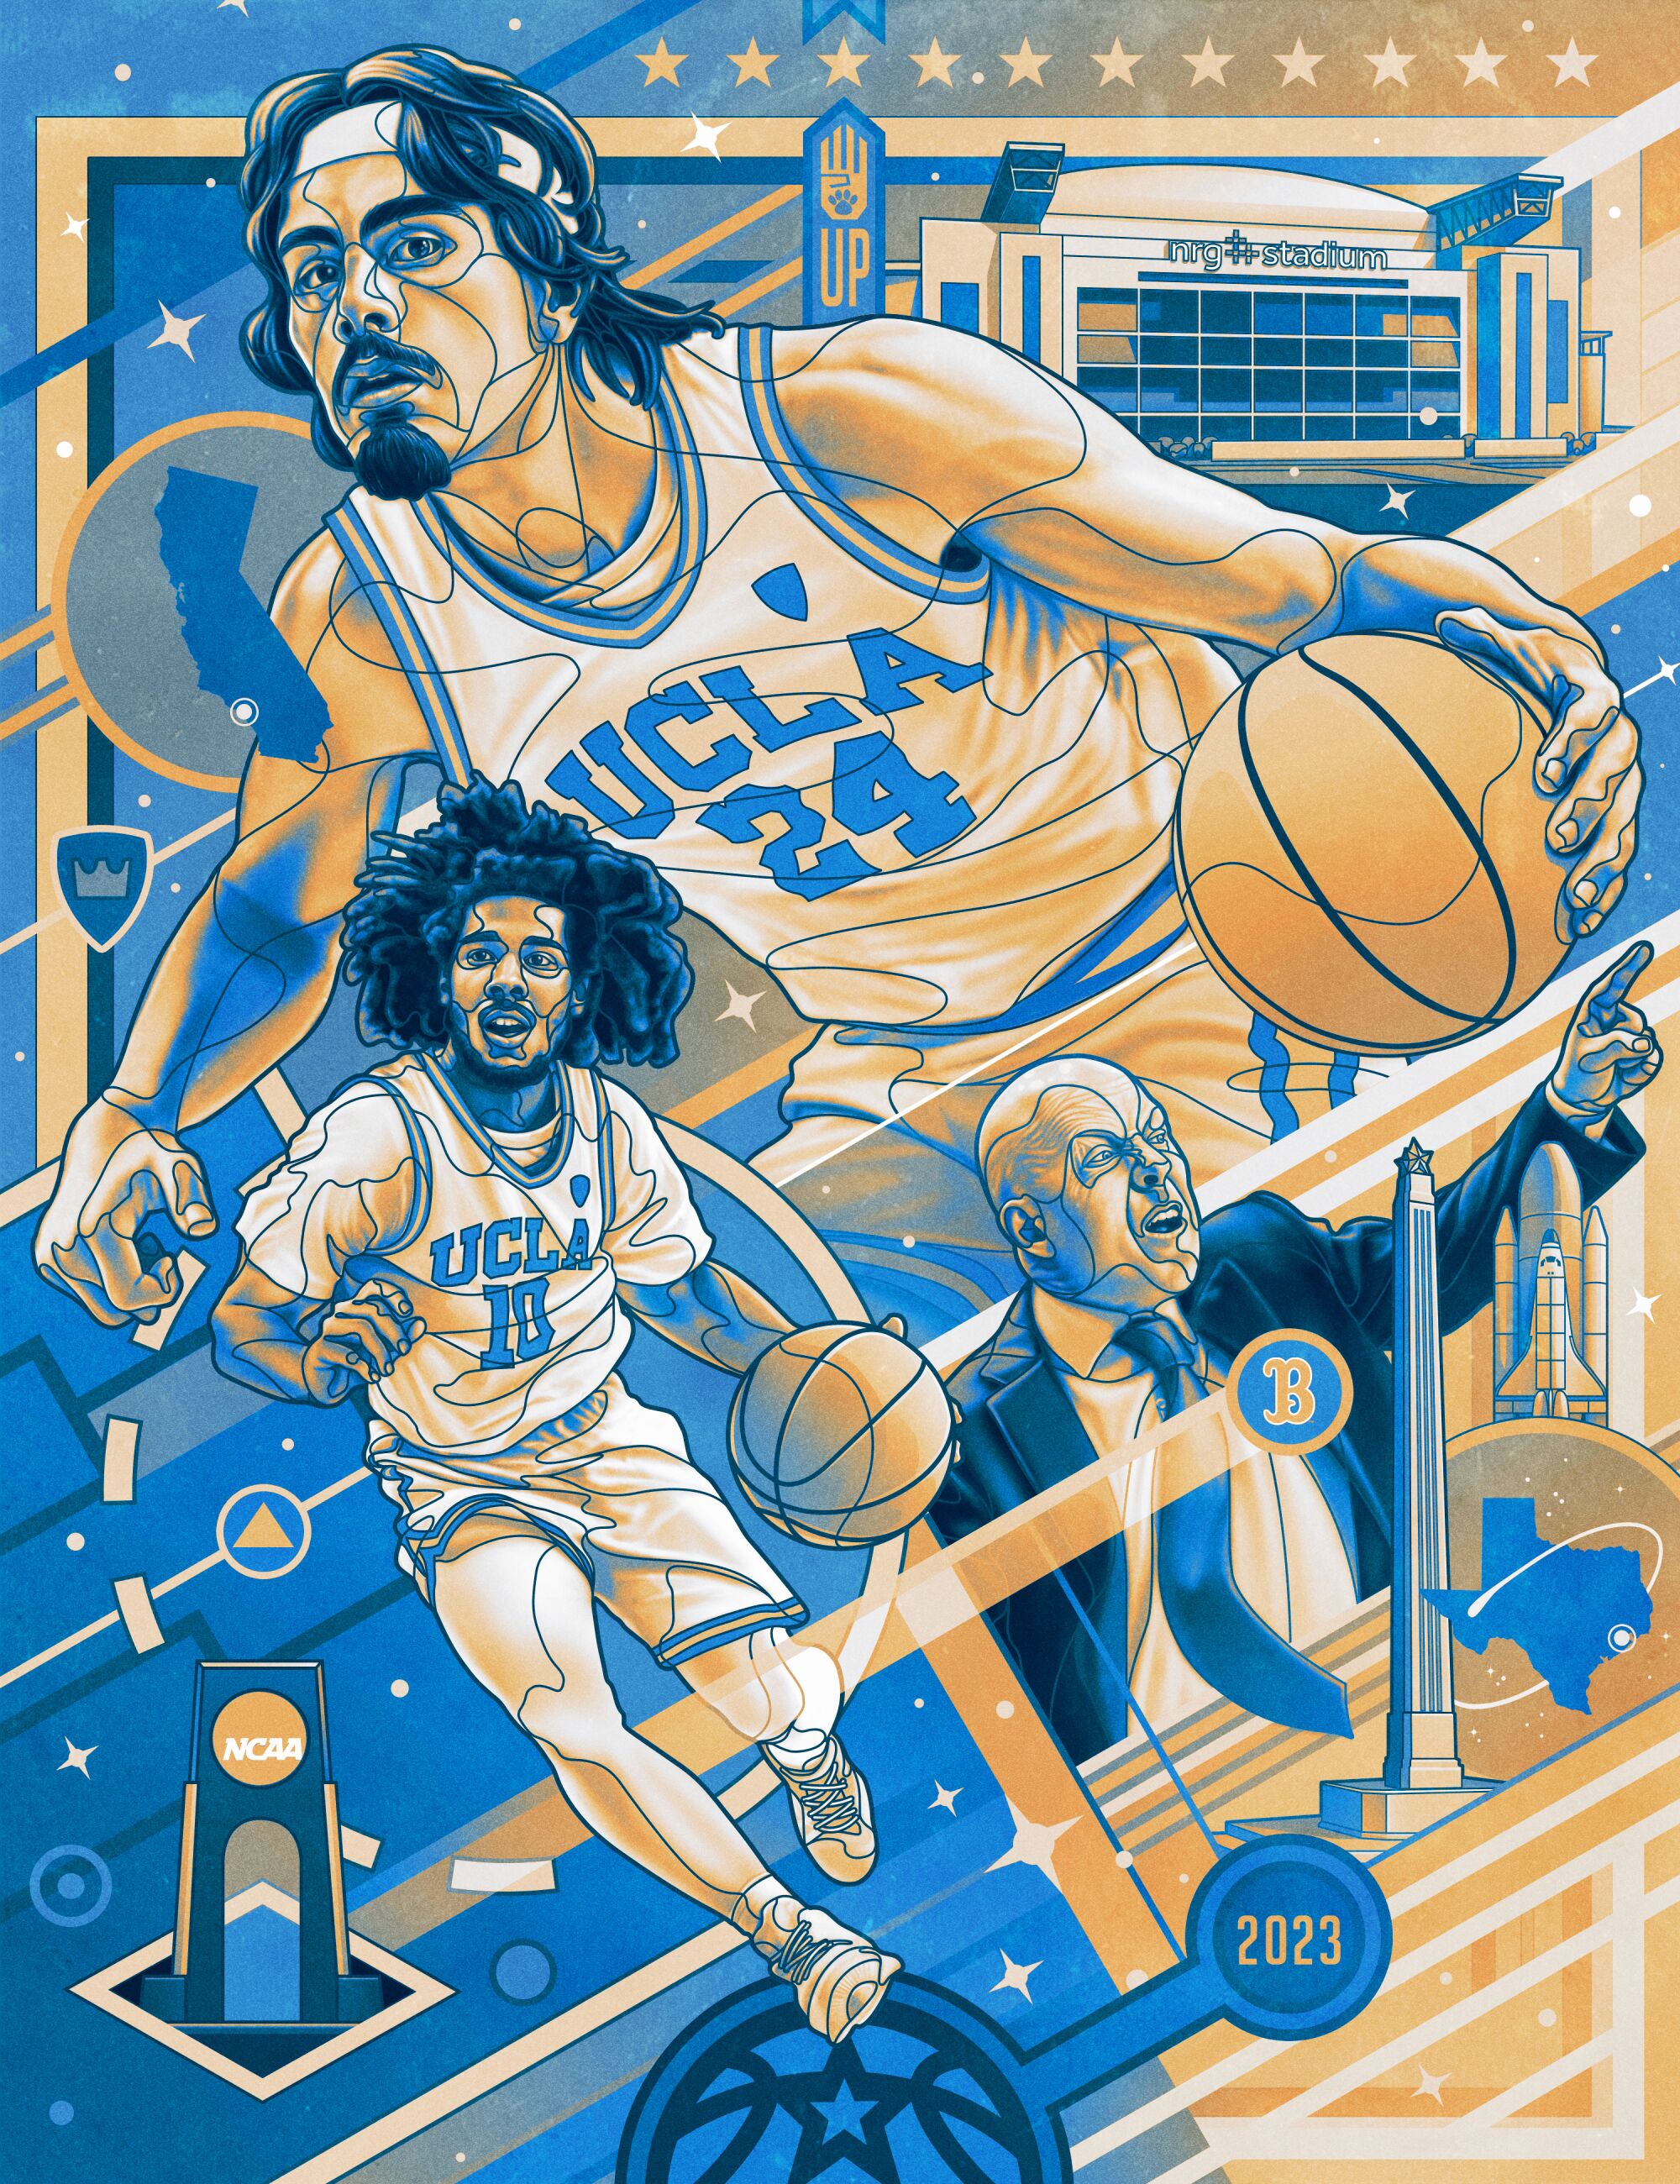 Illustration of two players wearing UCLA jerseys dribbling basketballs. And a coach wearing a suit gesturing with his finger.